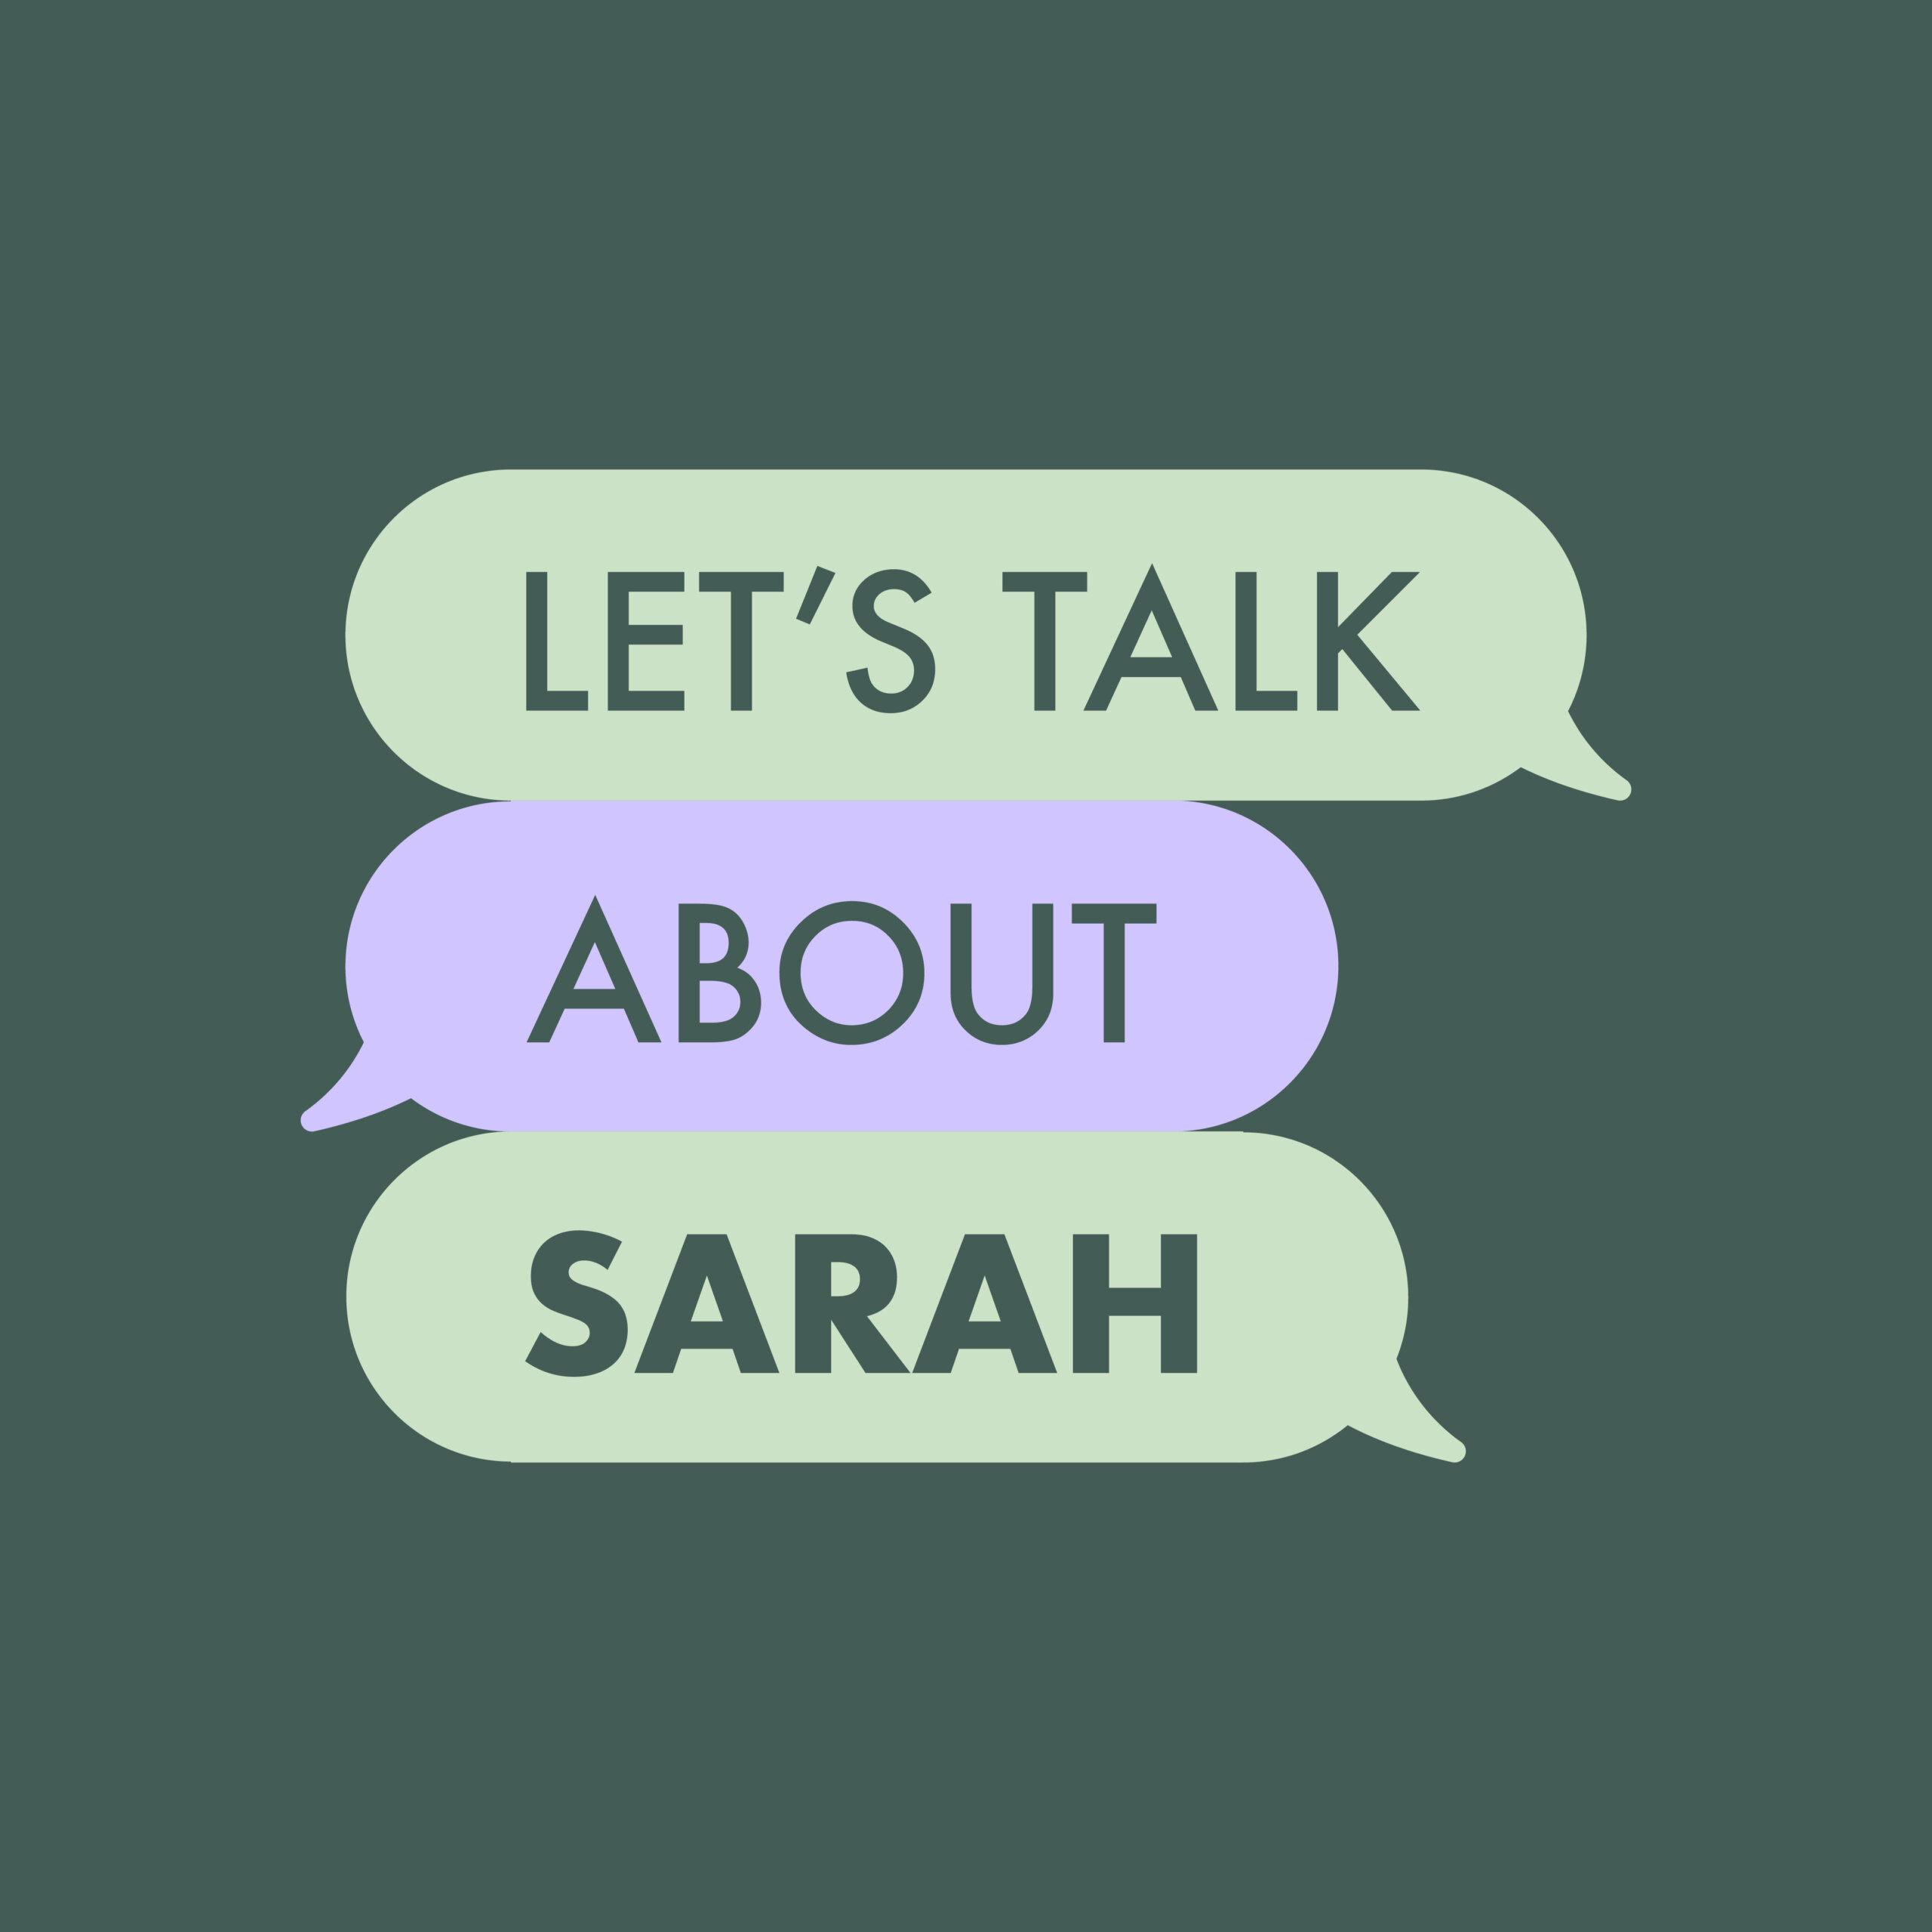 Stylized text to resemble a chat conversation with alternating words saying "Let's Talk About SARAH"